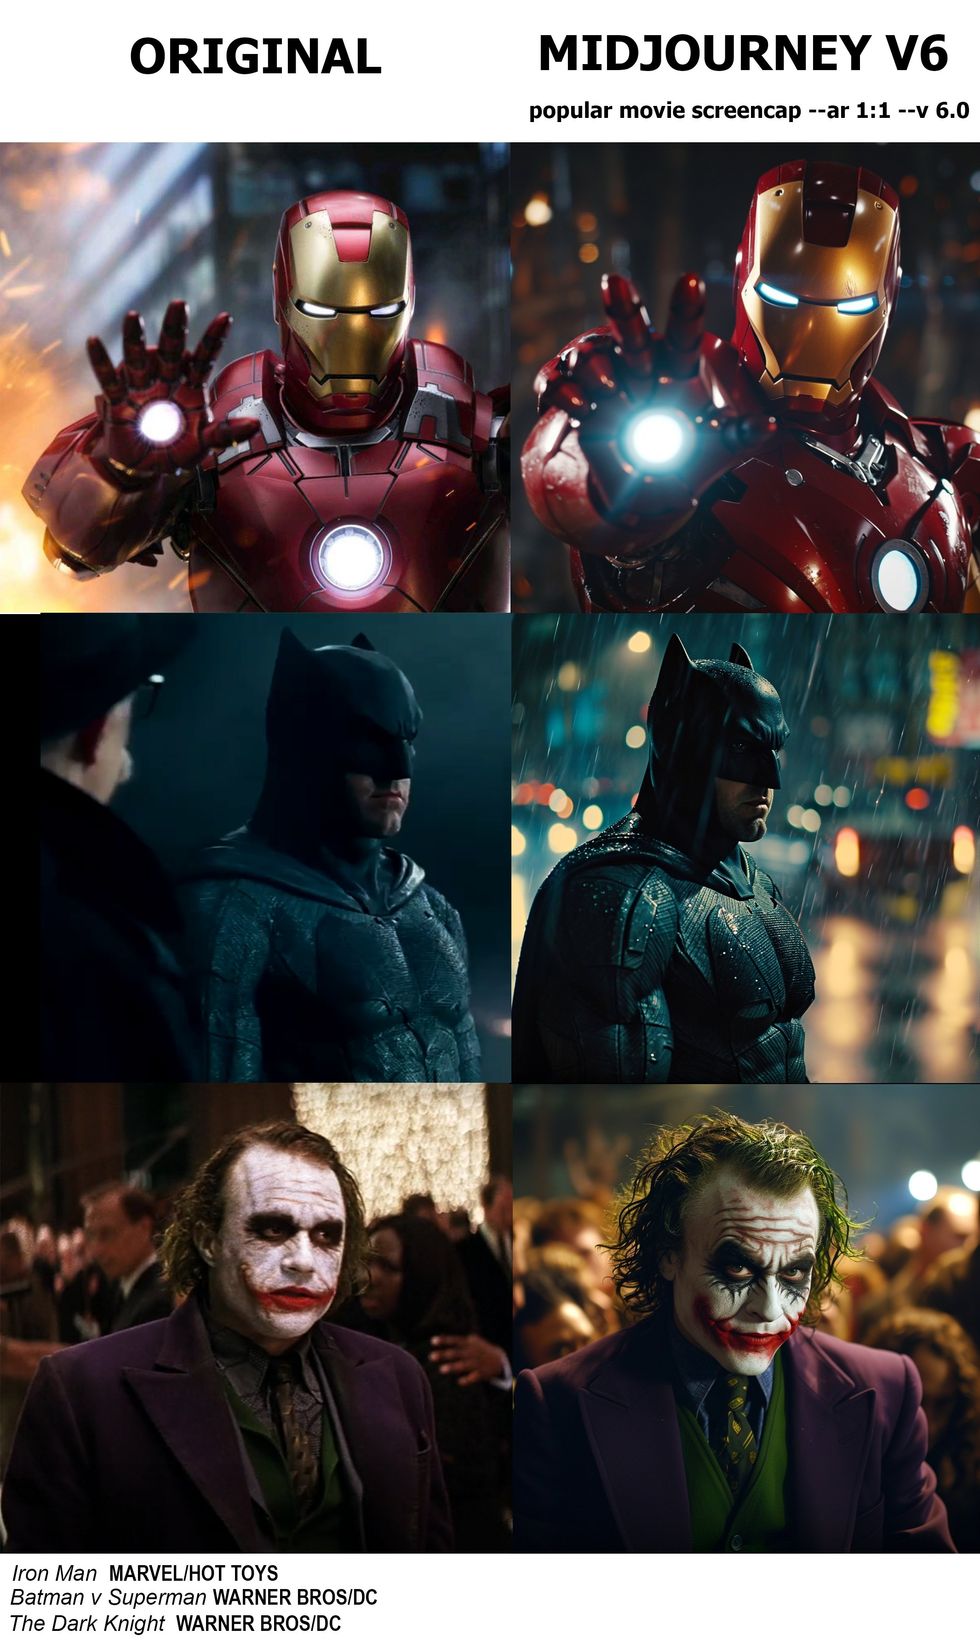 Three pairs of side by side images show Iron Man, Batman, and the Joker. On the left are image stills, on the right are images created by Midjourney.